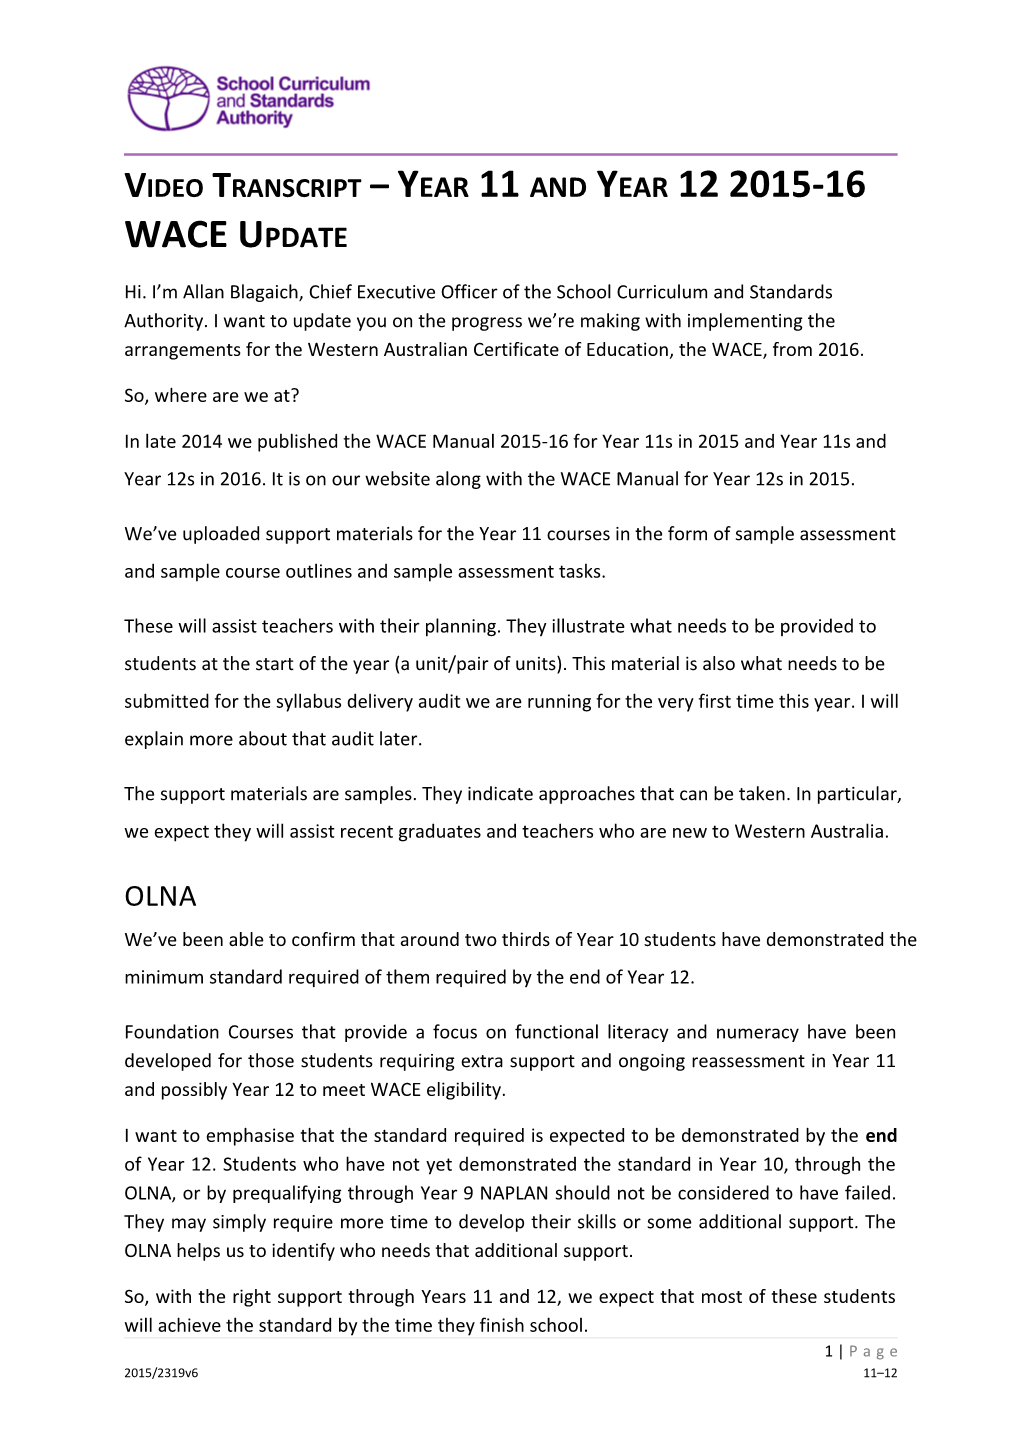 Video Transcript Year 11 and Year 12 2015-16 WACE Update